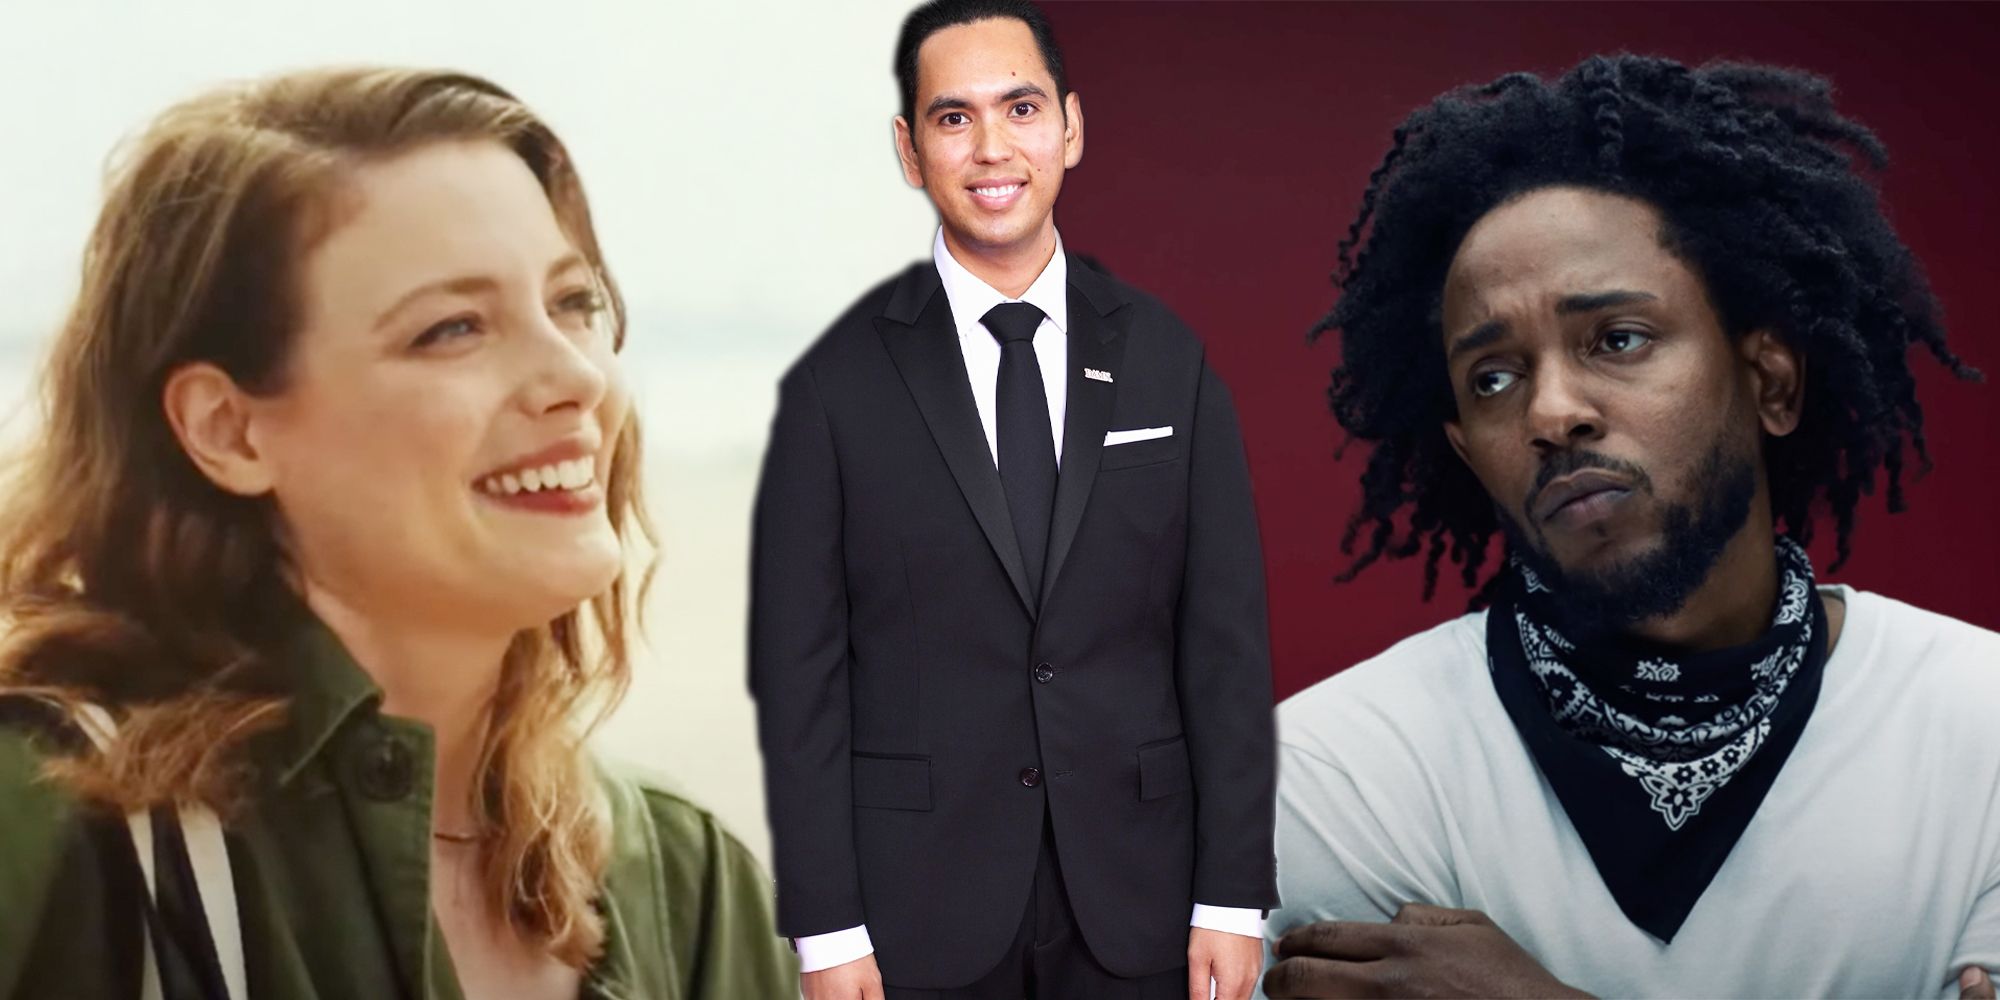 Gillian Jacobs in The Seven Faces of Jane, producer Jason Baum, and Kendrick Lamar in The Heart Part 5